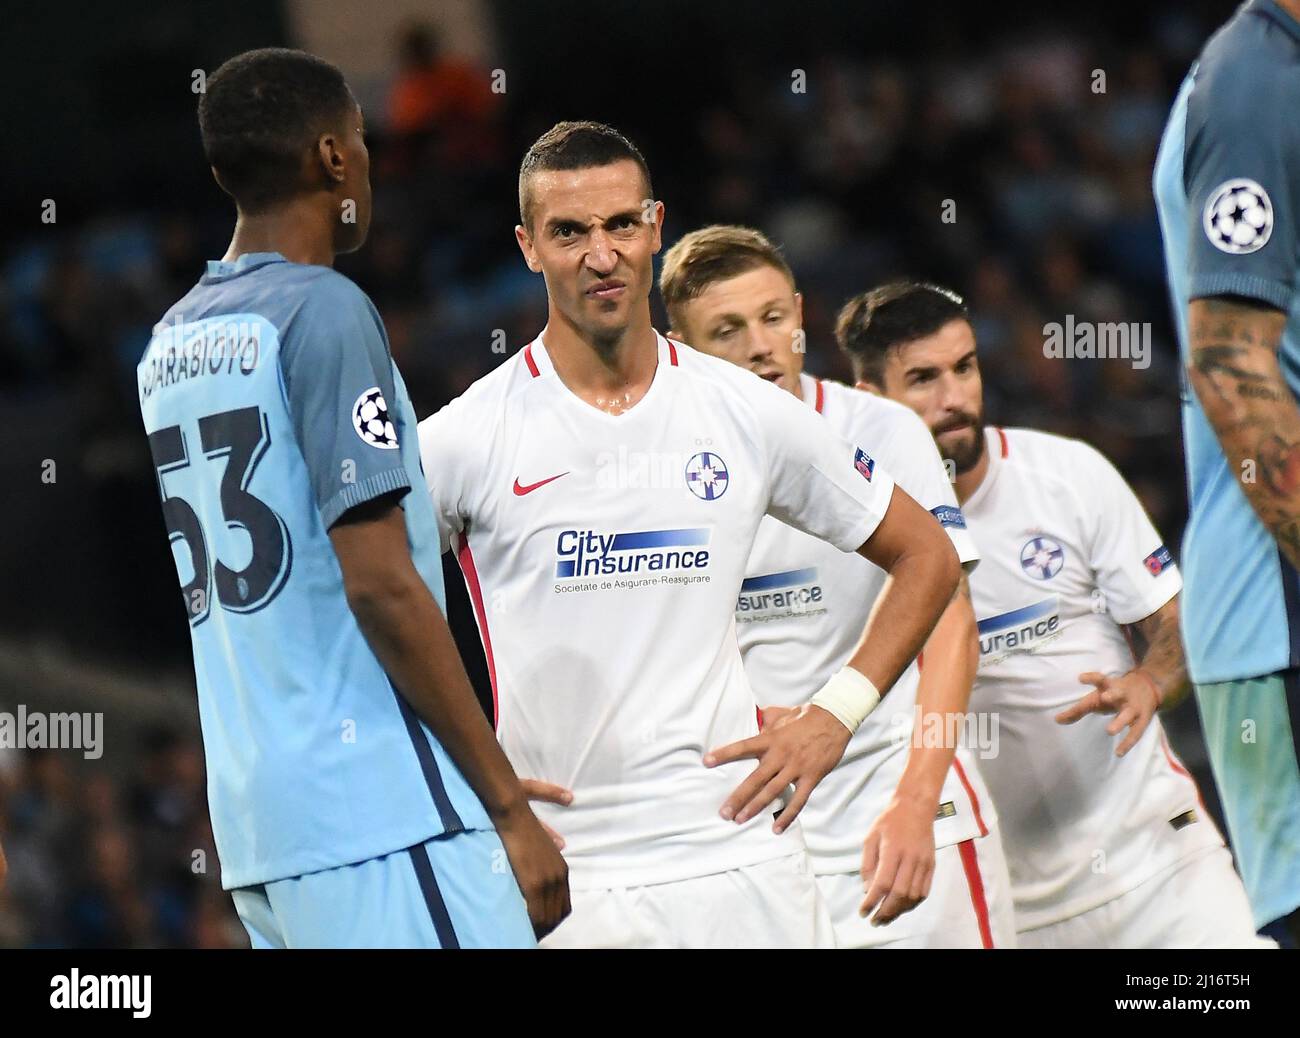 MANCHESTER, ENGLAND - AUGUST 24, 2016: Marko Momcilovic of FCSB pictured during the second leg of the 2016/17 UEFA Champions League tie between Manchester City (Engalnd) and FCSB (Romania) at Etihad Stadium. Copyright: Cosmin Iftode/Picstaff Stock Photo